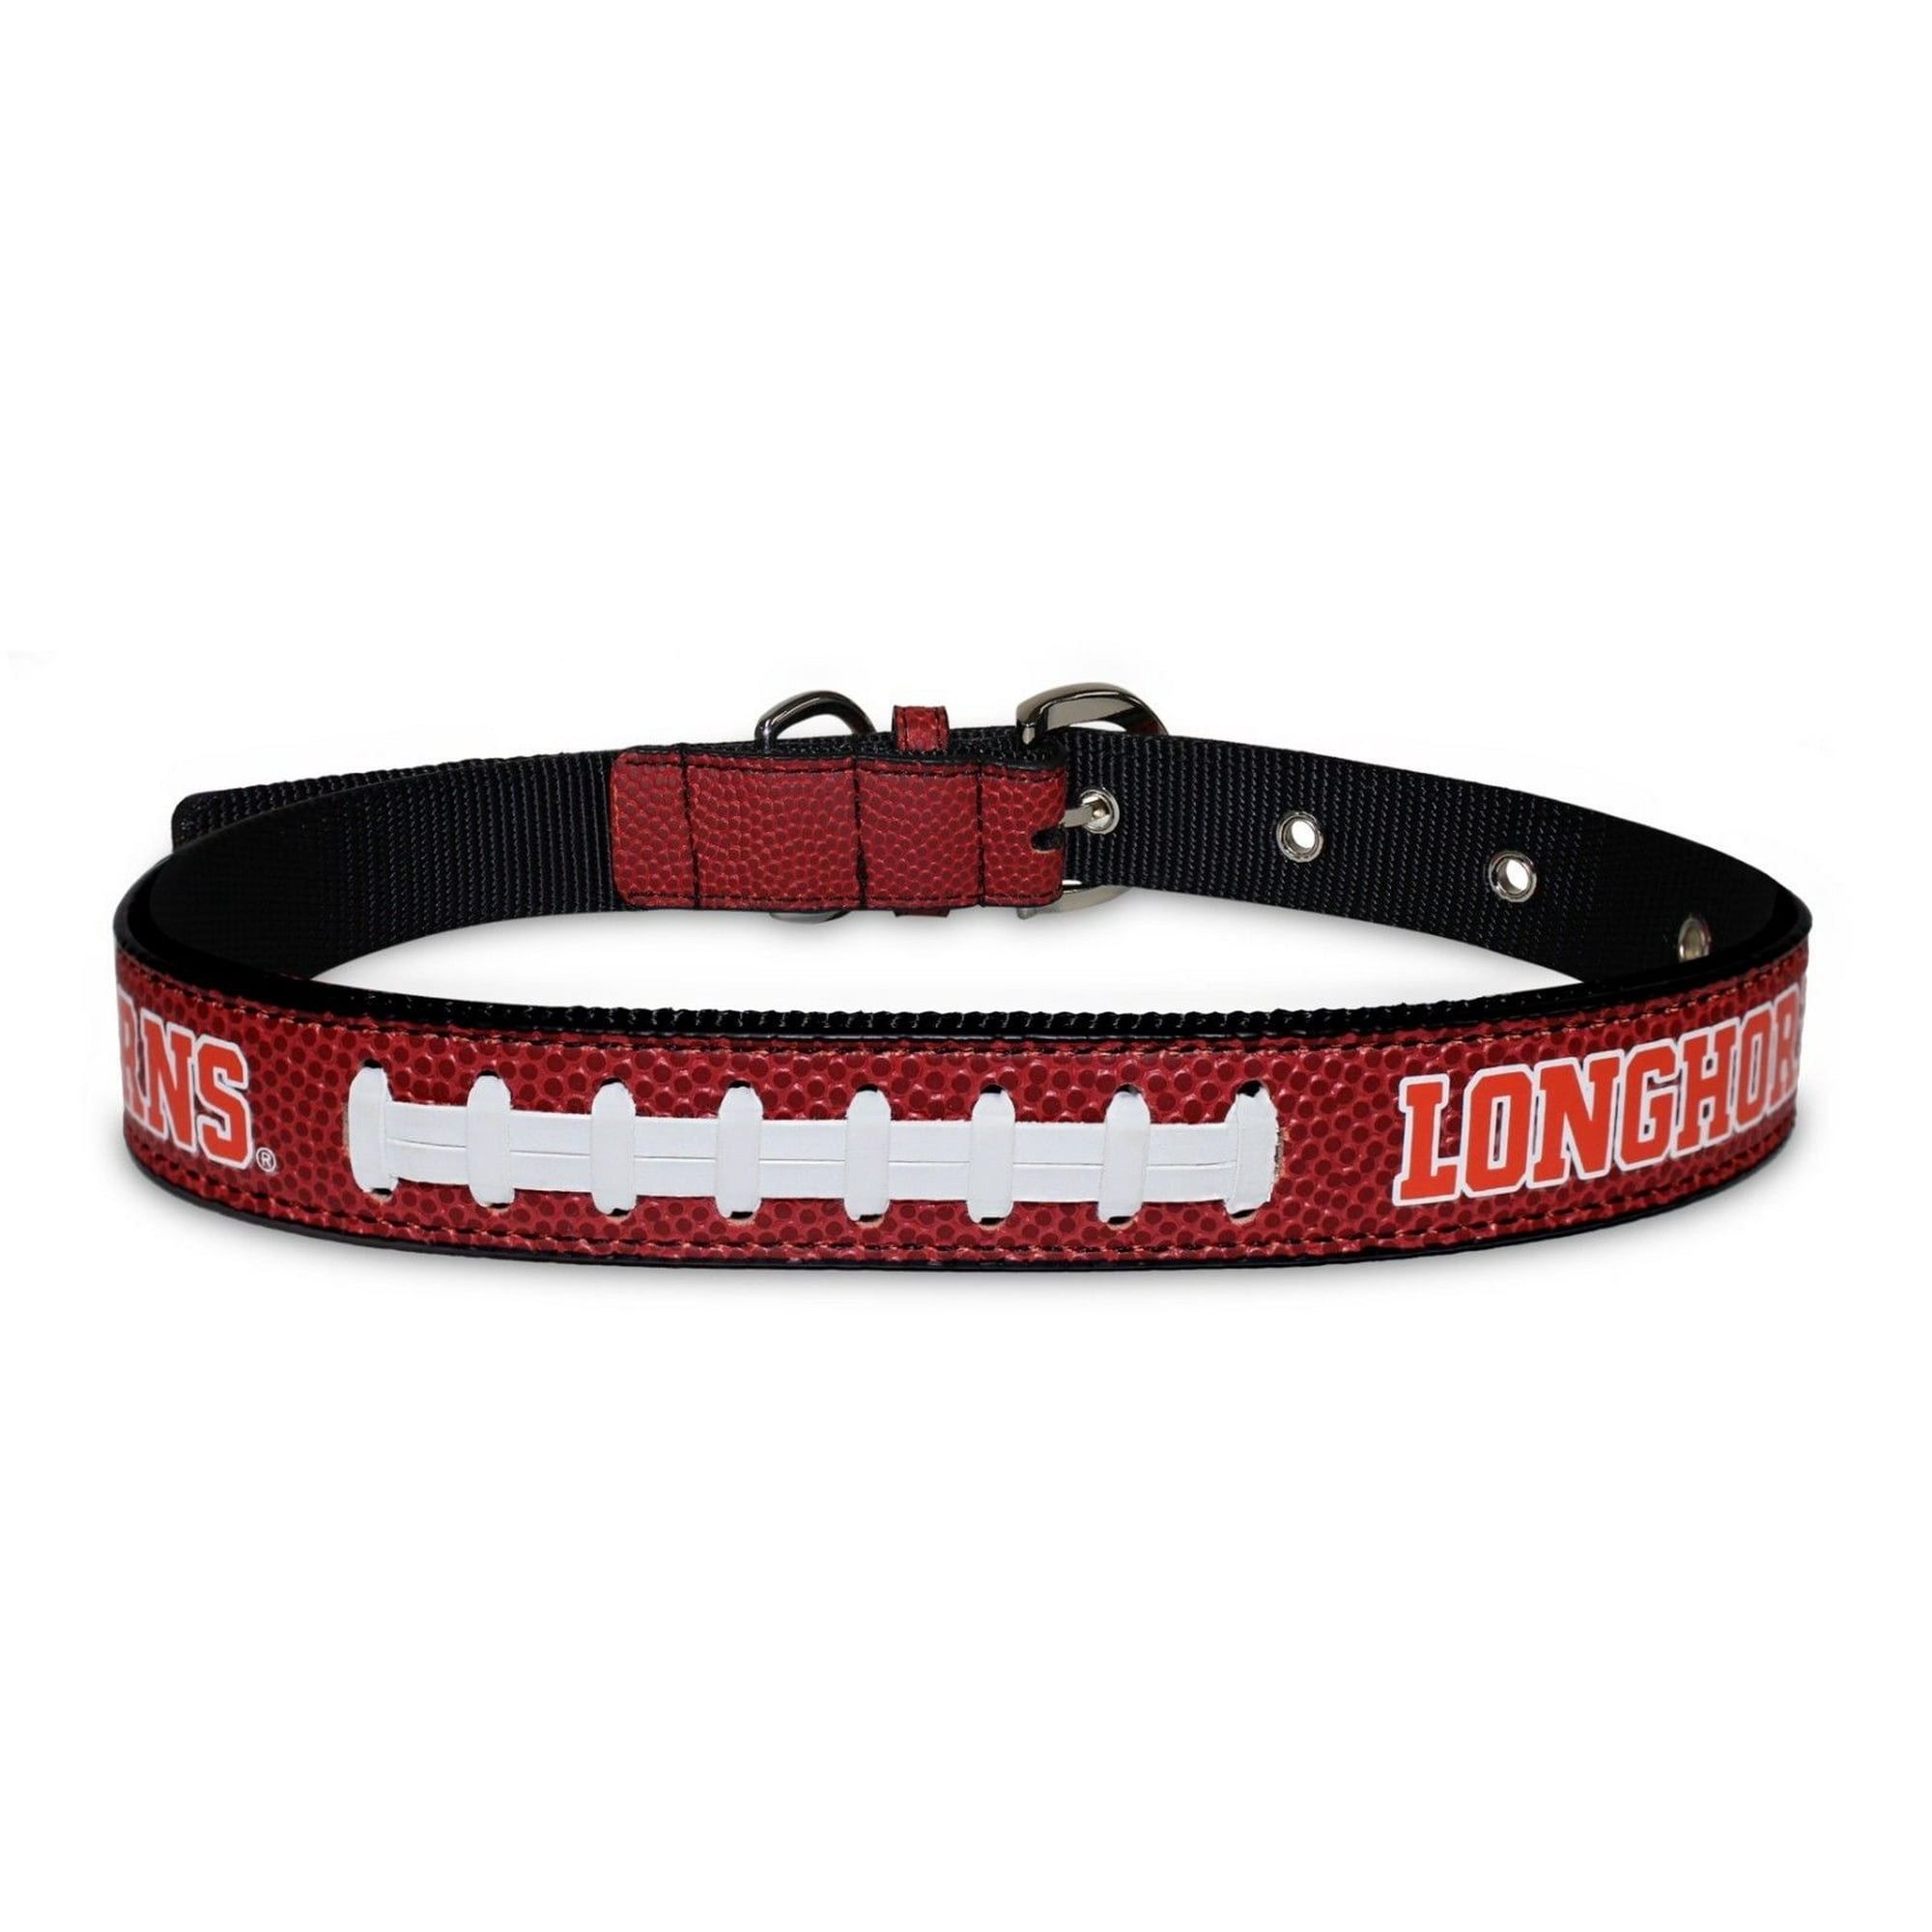 Pets First Collegiate Pet Accessories, Dog Collar, Texas Longhorns, Small